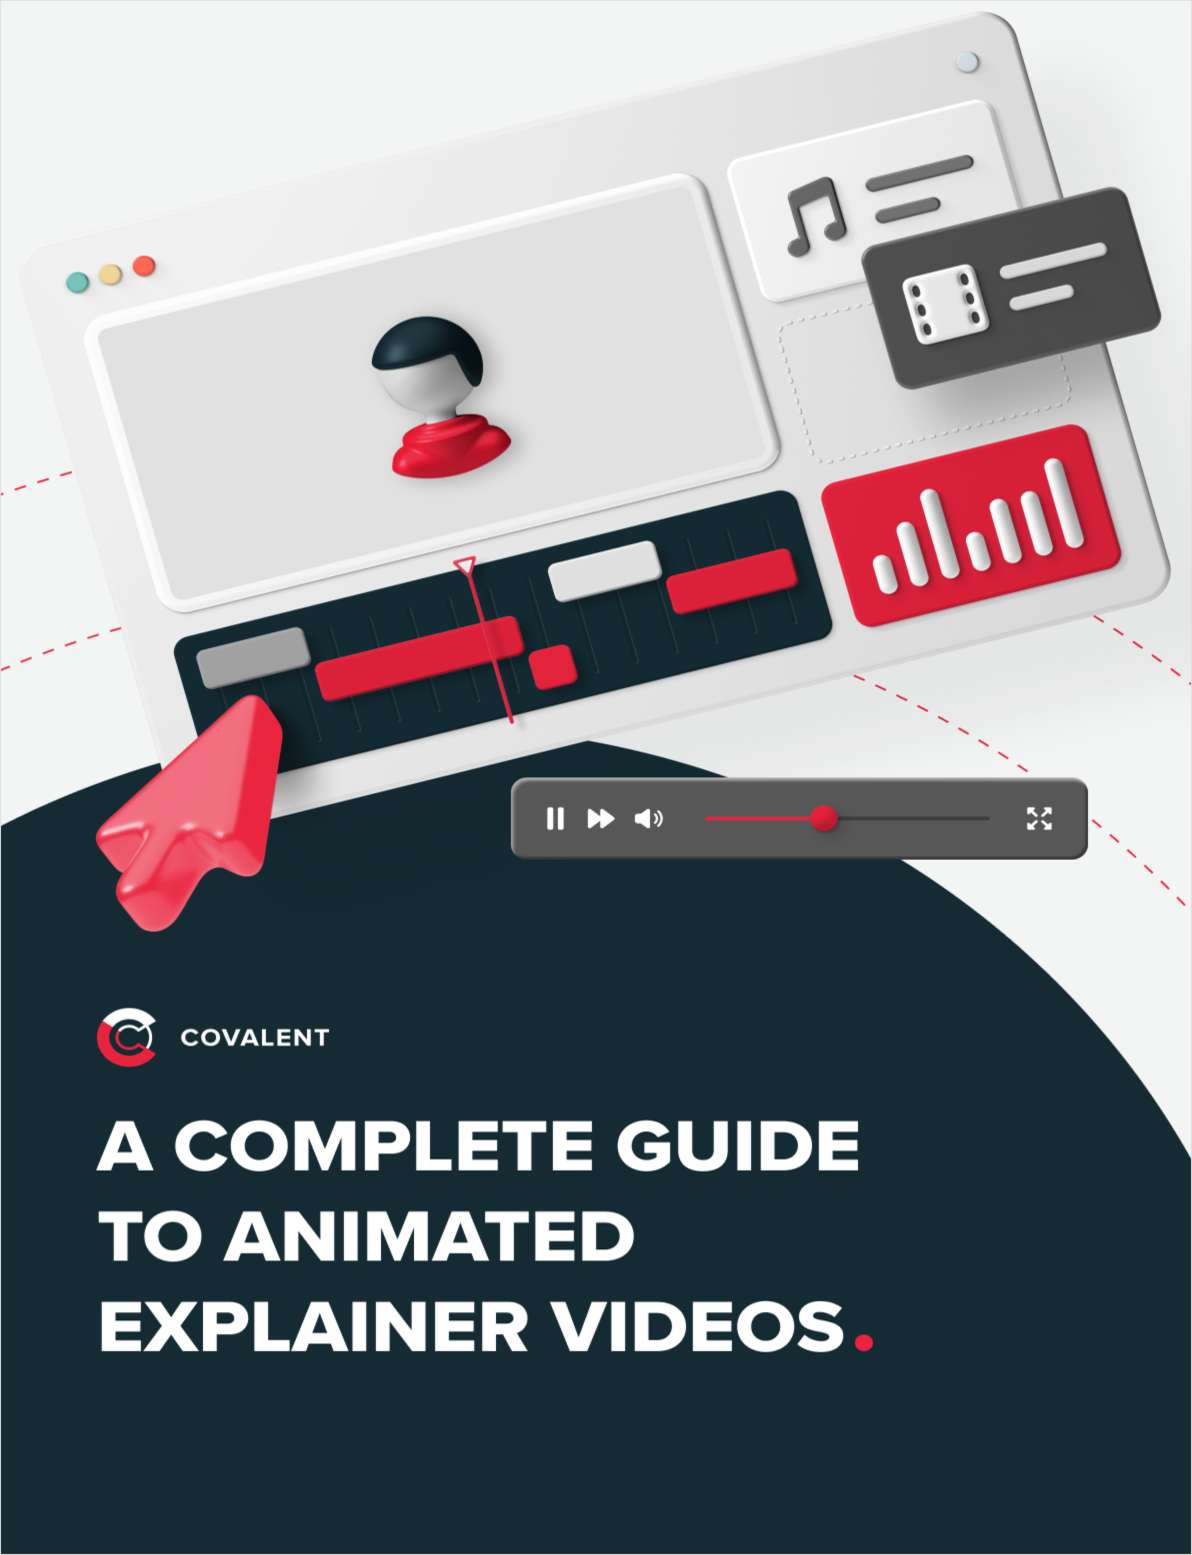 A Complete Guide to Animated Explainers